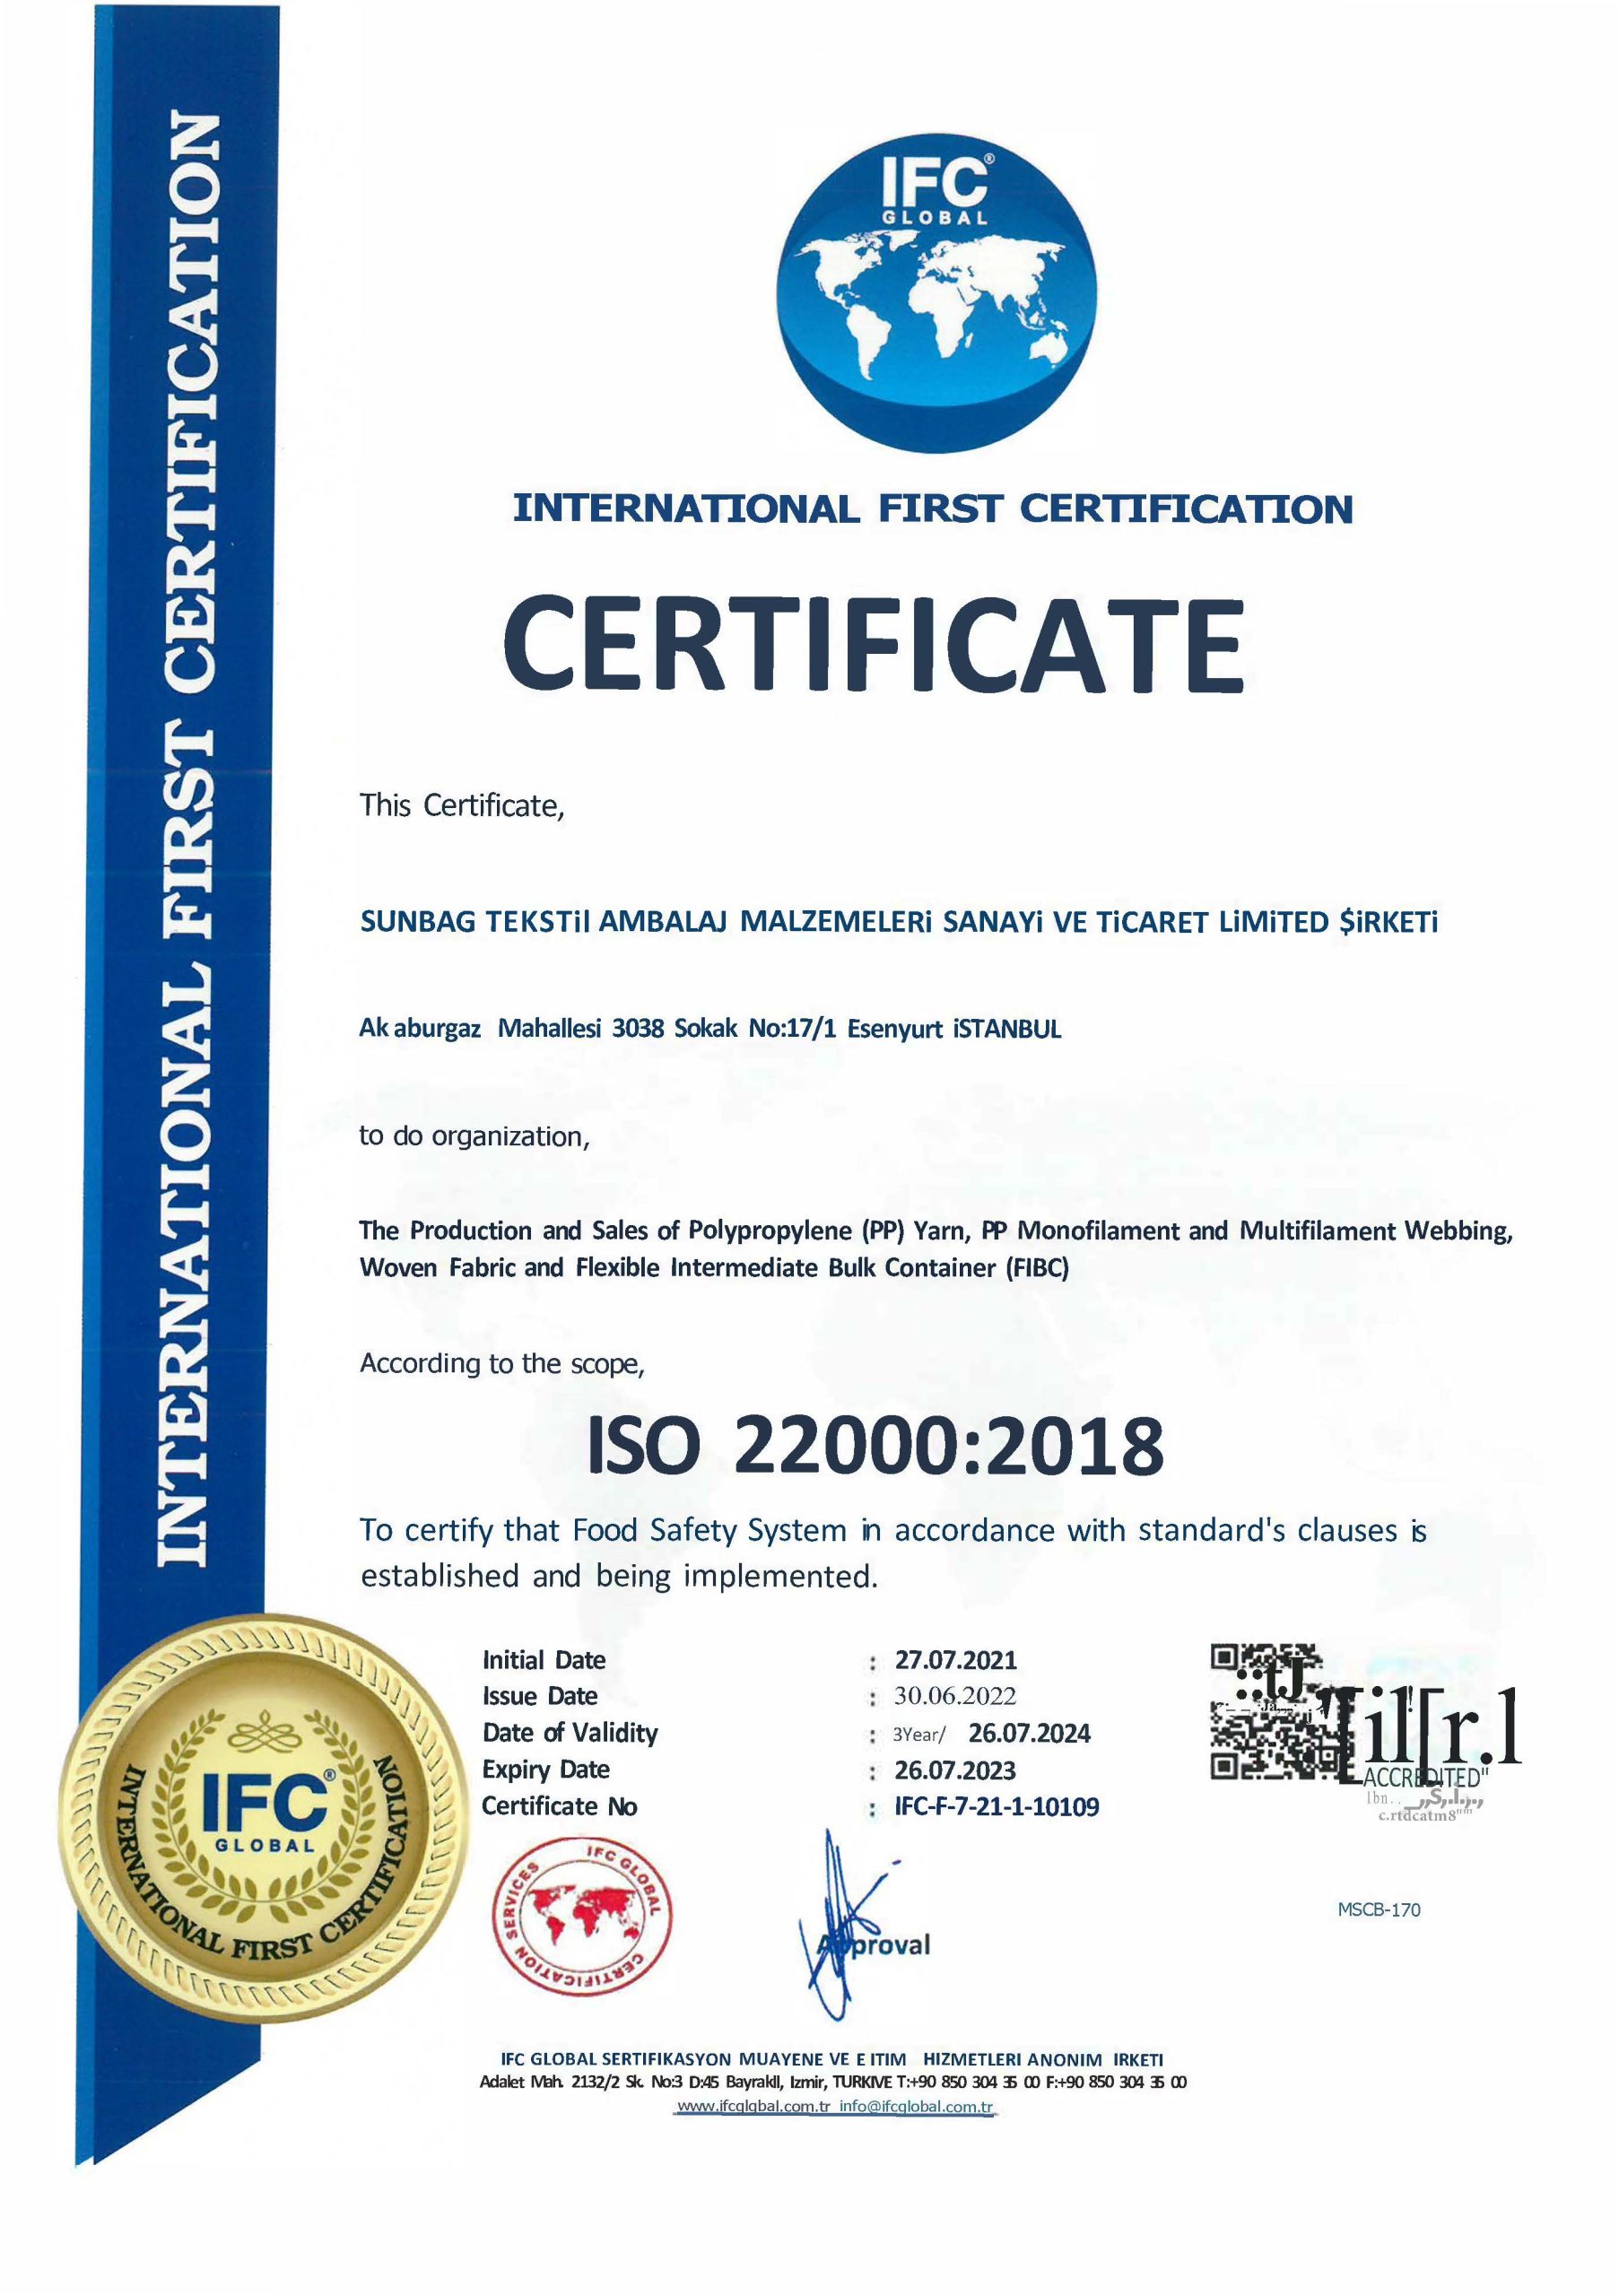 515-iso-22000-2018-food-safety-management-system